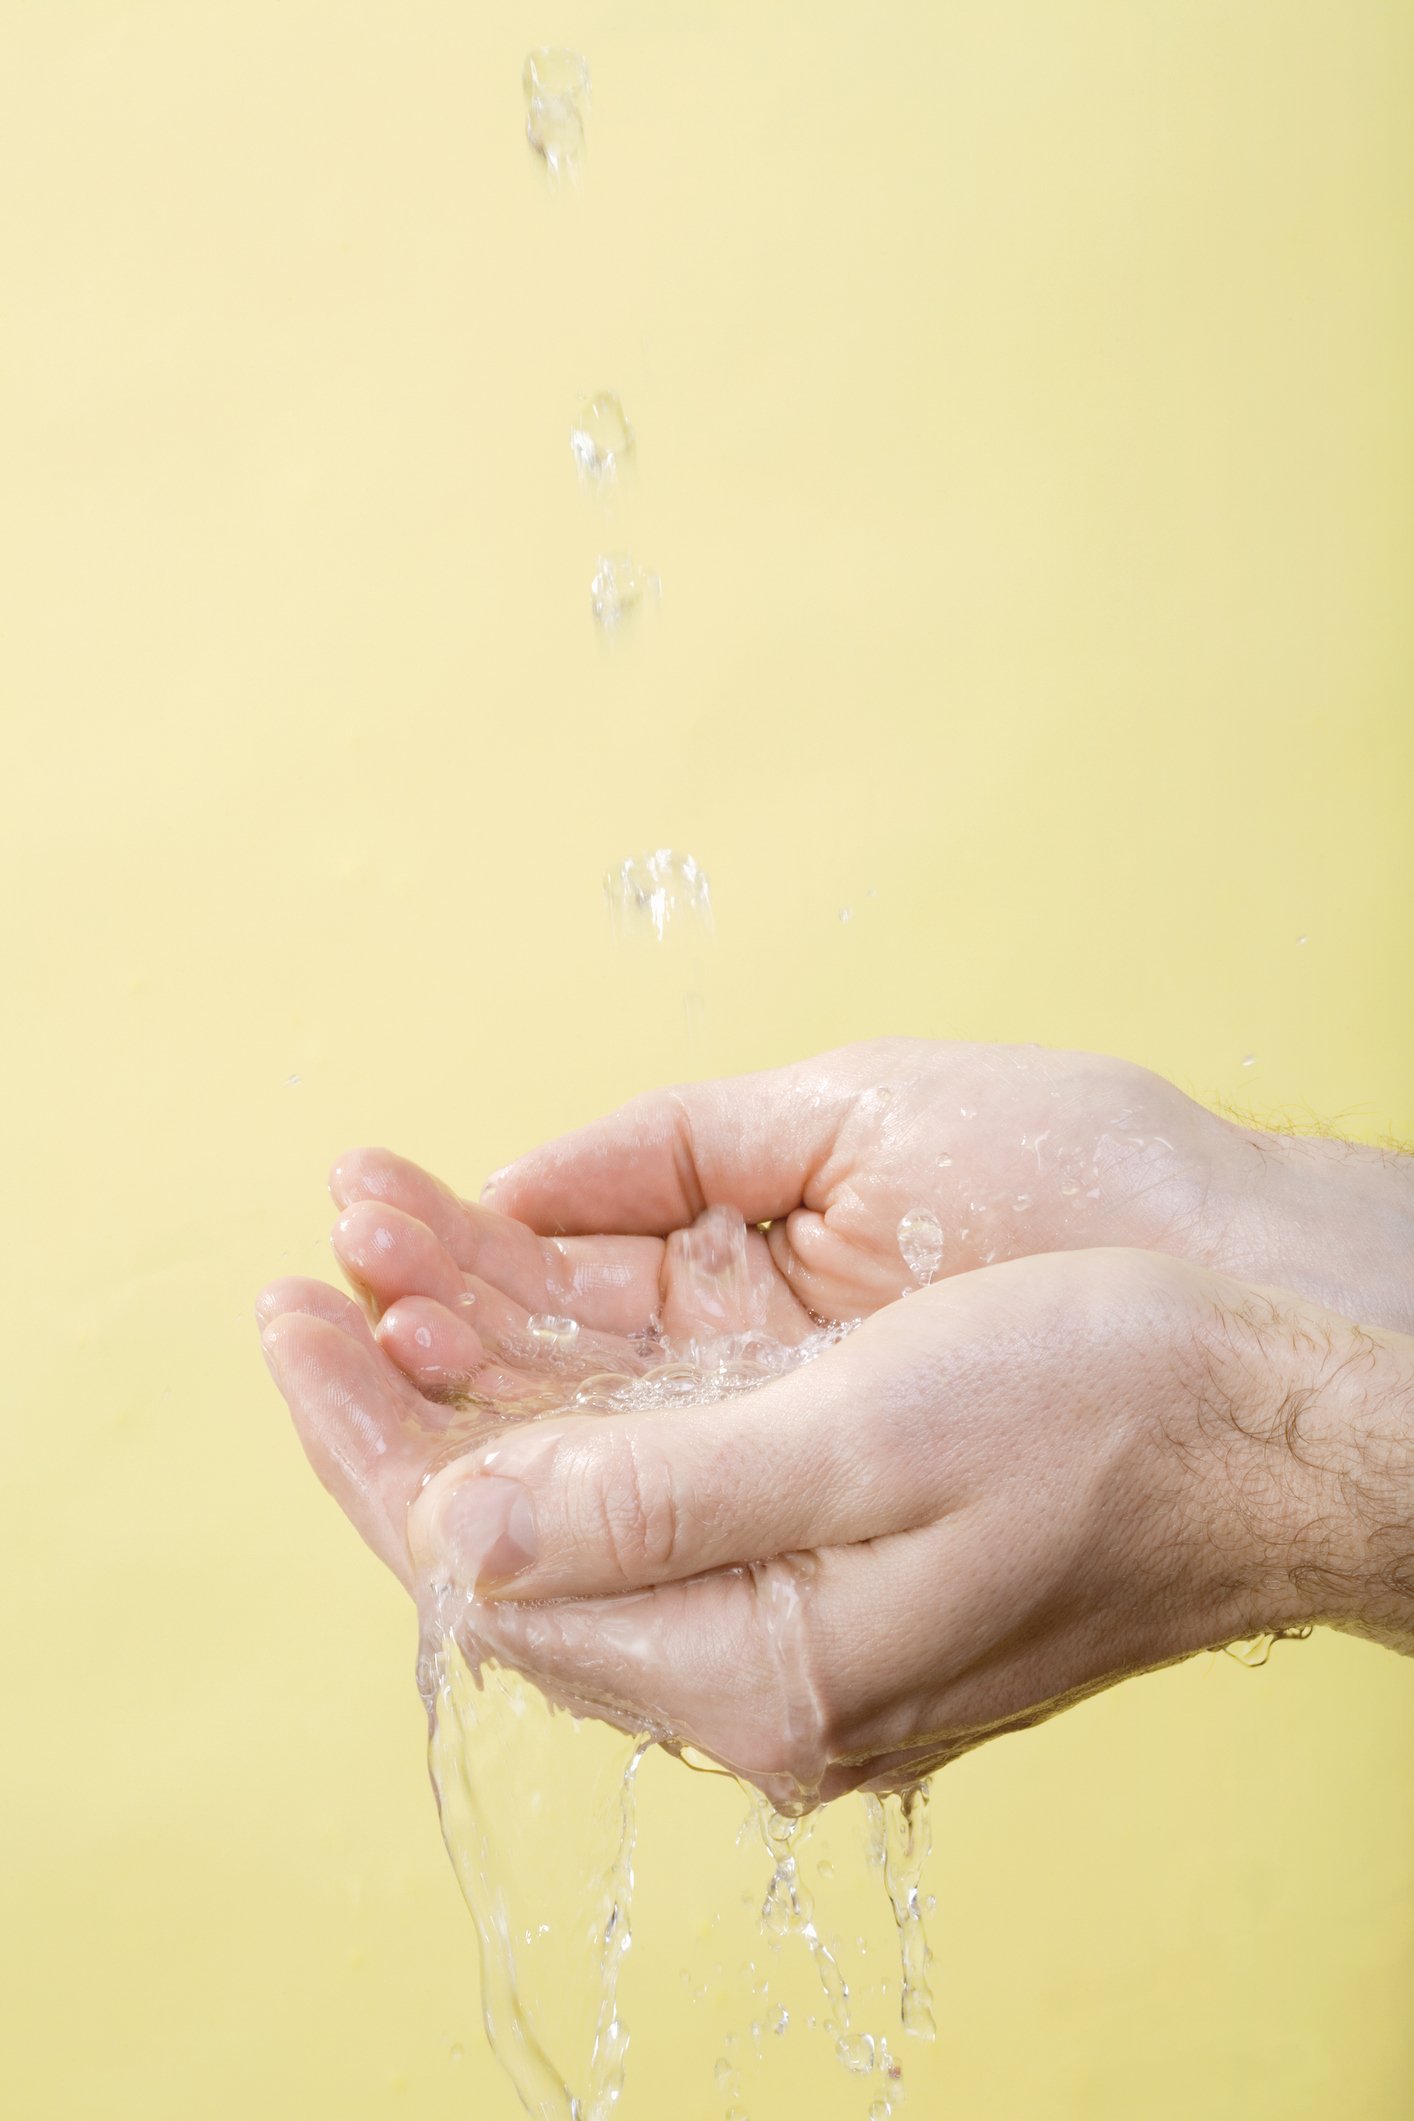 Person catching dripping water in their hands against a yellow background